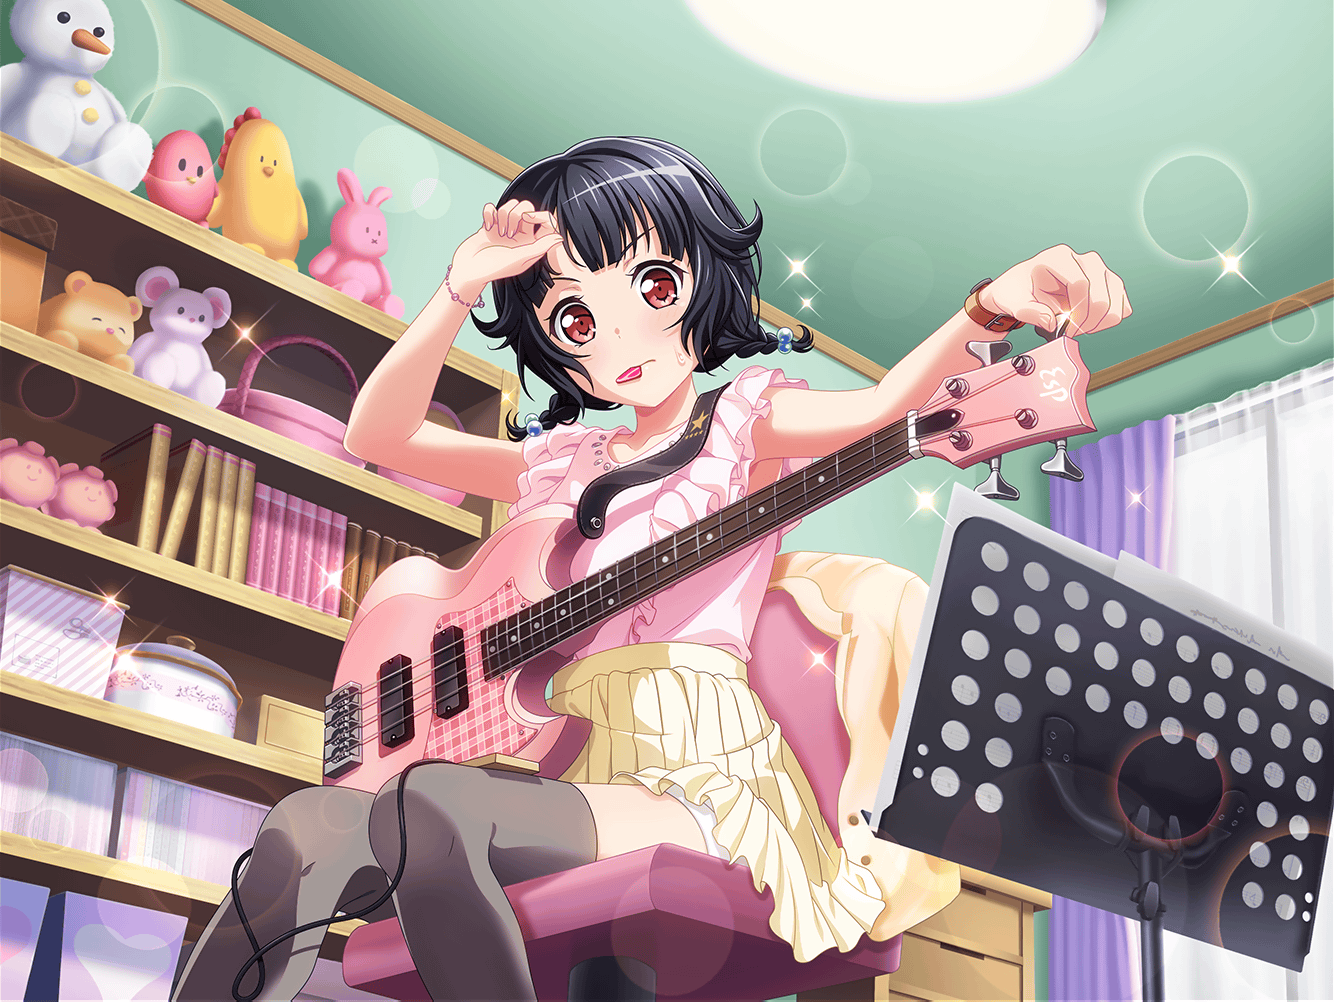 So I was scrolling through the Bandori Wiki! looking at the upcoming events  and then I saw this untrained card art from Rimi from the upcoming 'Band  Girls of Dead' event in